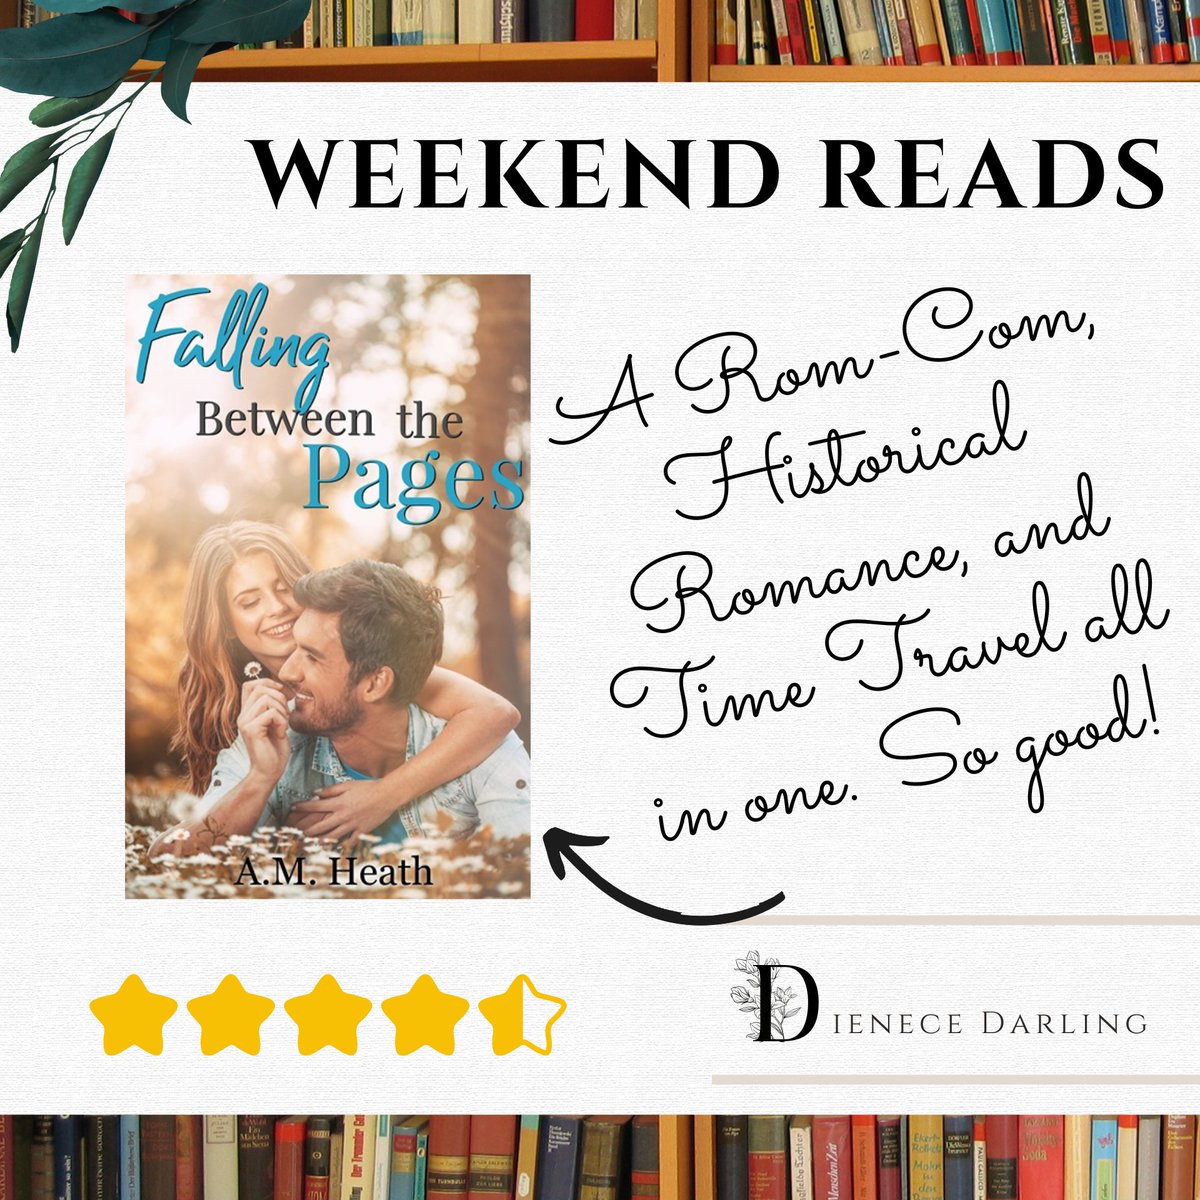 This was such a fun concept! Two writers forced to write a book together decide to send their characters back to the old west. Not only do their characters fall in love, but the authors do too! So good.

#fallingbetweenthepages #weekendreads